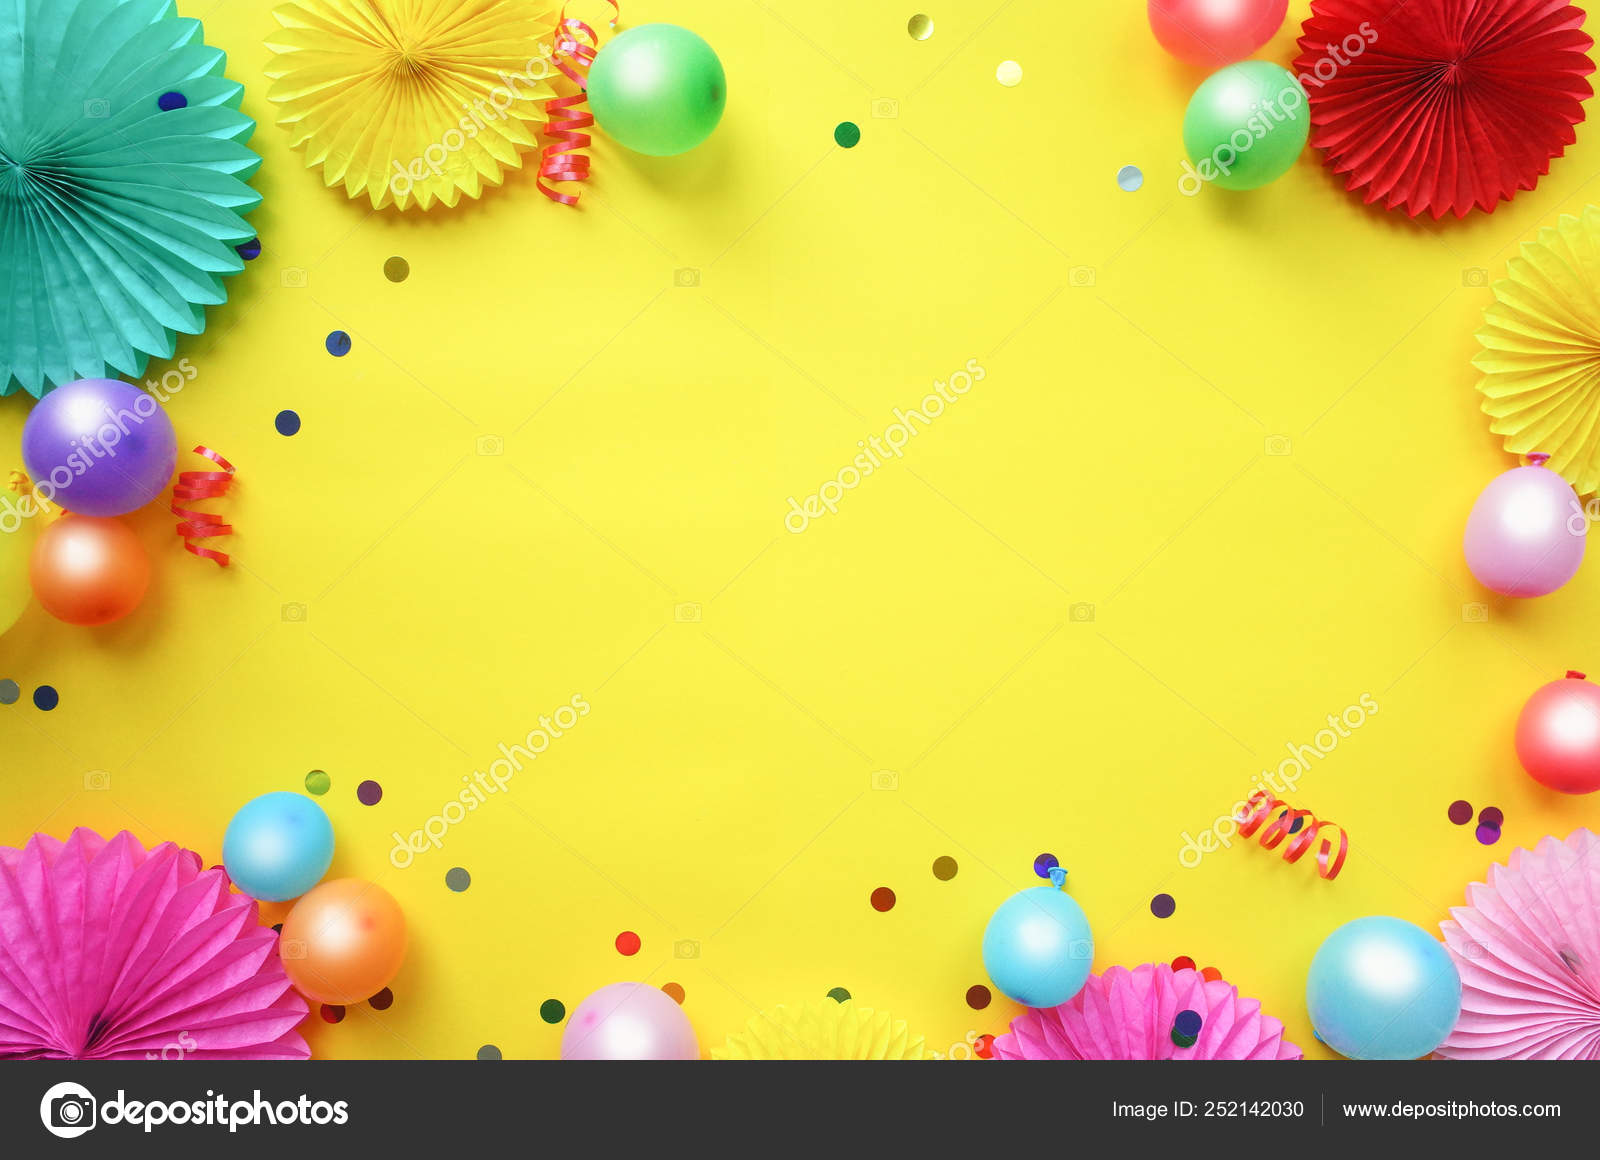 Paper Texture Flowers Different Baloons Yellow Background Birthday Holiday  Party Stock Photo by ©.com 252142030